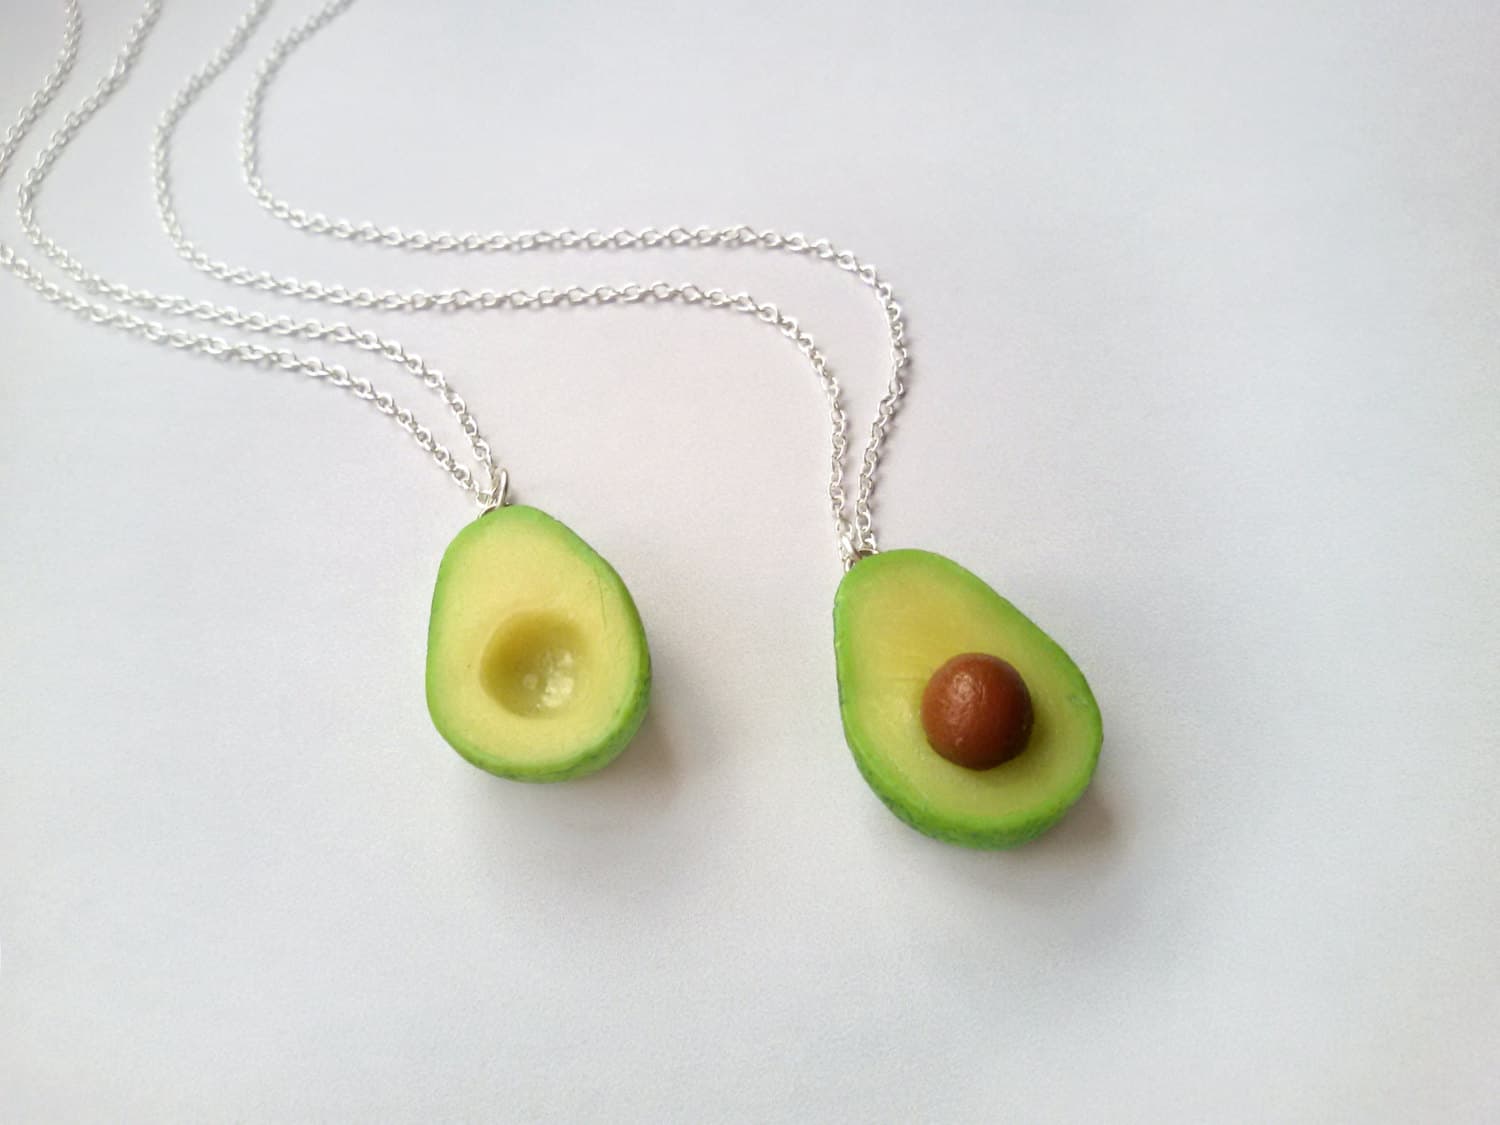 Buy Avocado Friendship Necklace Set of 2, Funny Cute Bff Best Friend Gift,  Foodie Millenial Present Vegetarian Vegan Gift, Stainless Steel Chain  Online in India - Etsy